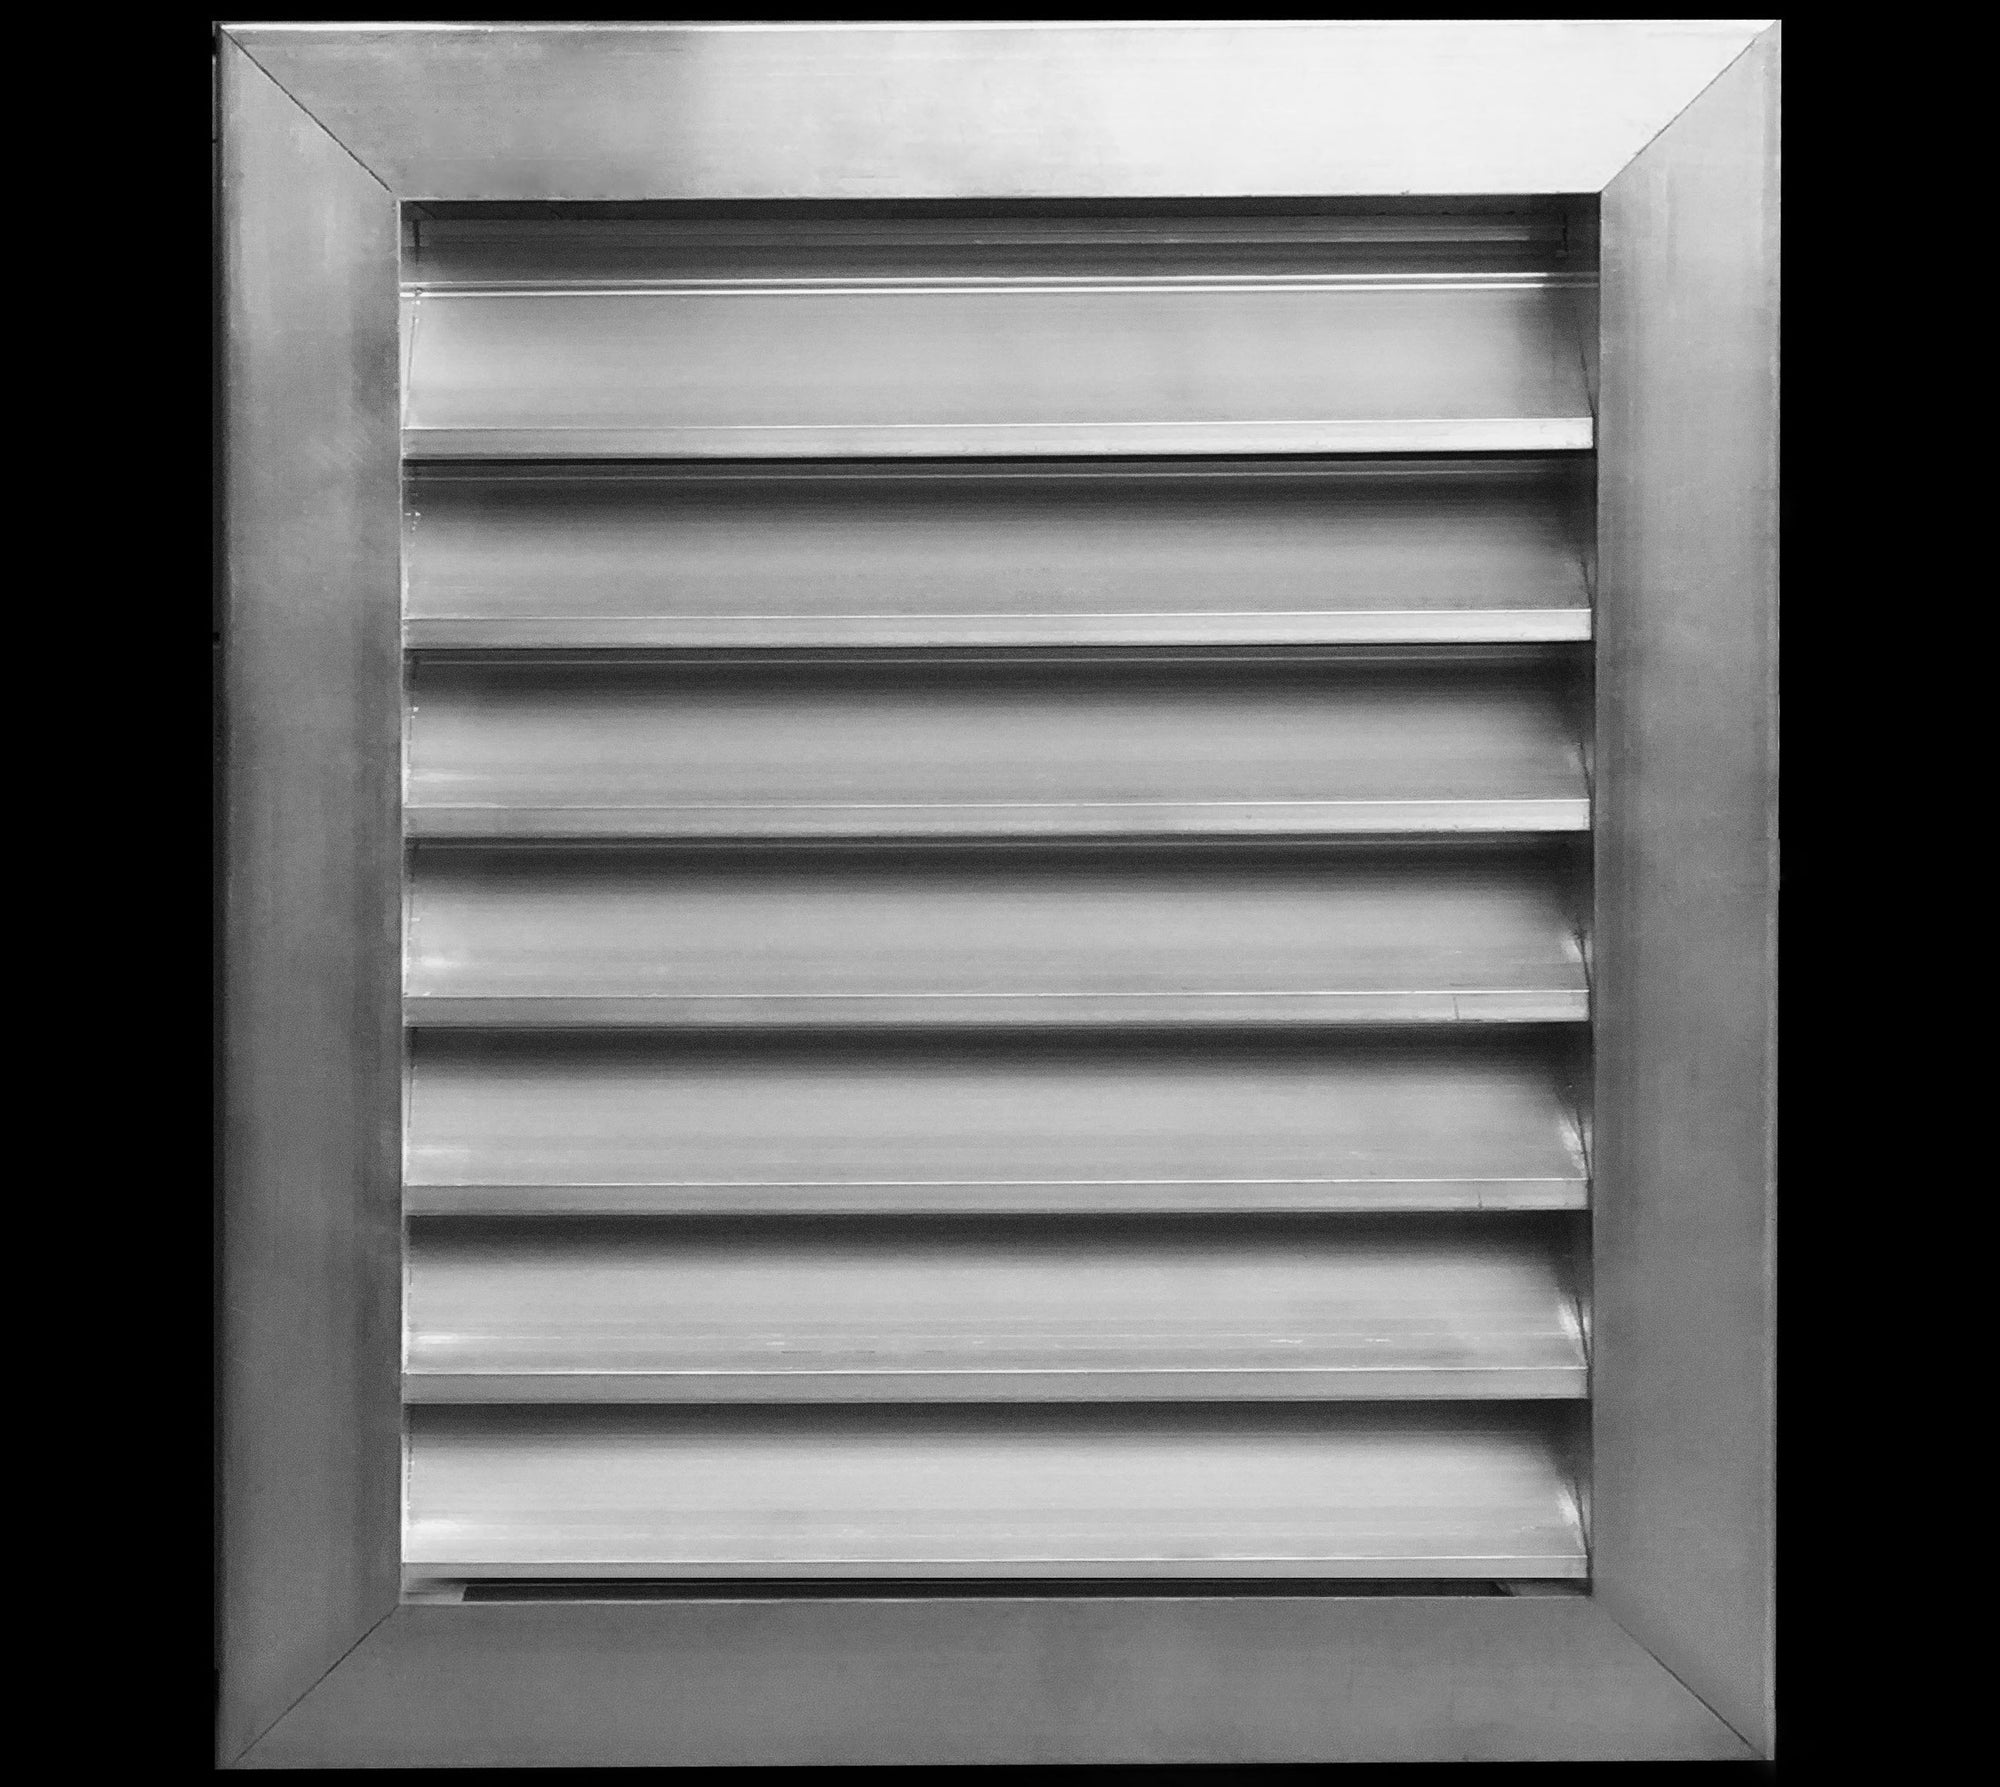 16"w X 16"h Aluminum Outdoor Weather Proof Louvers